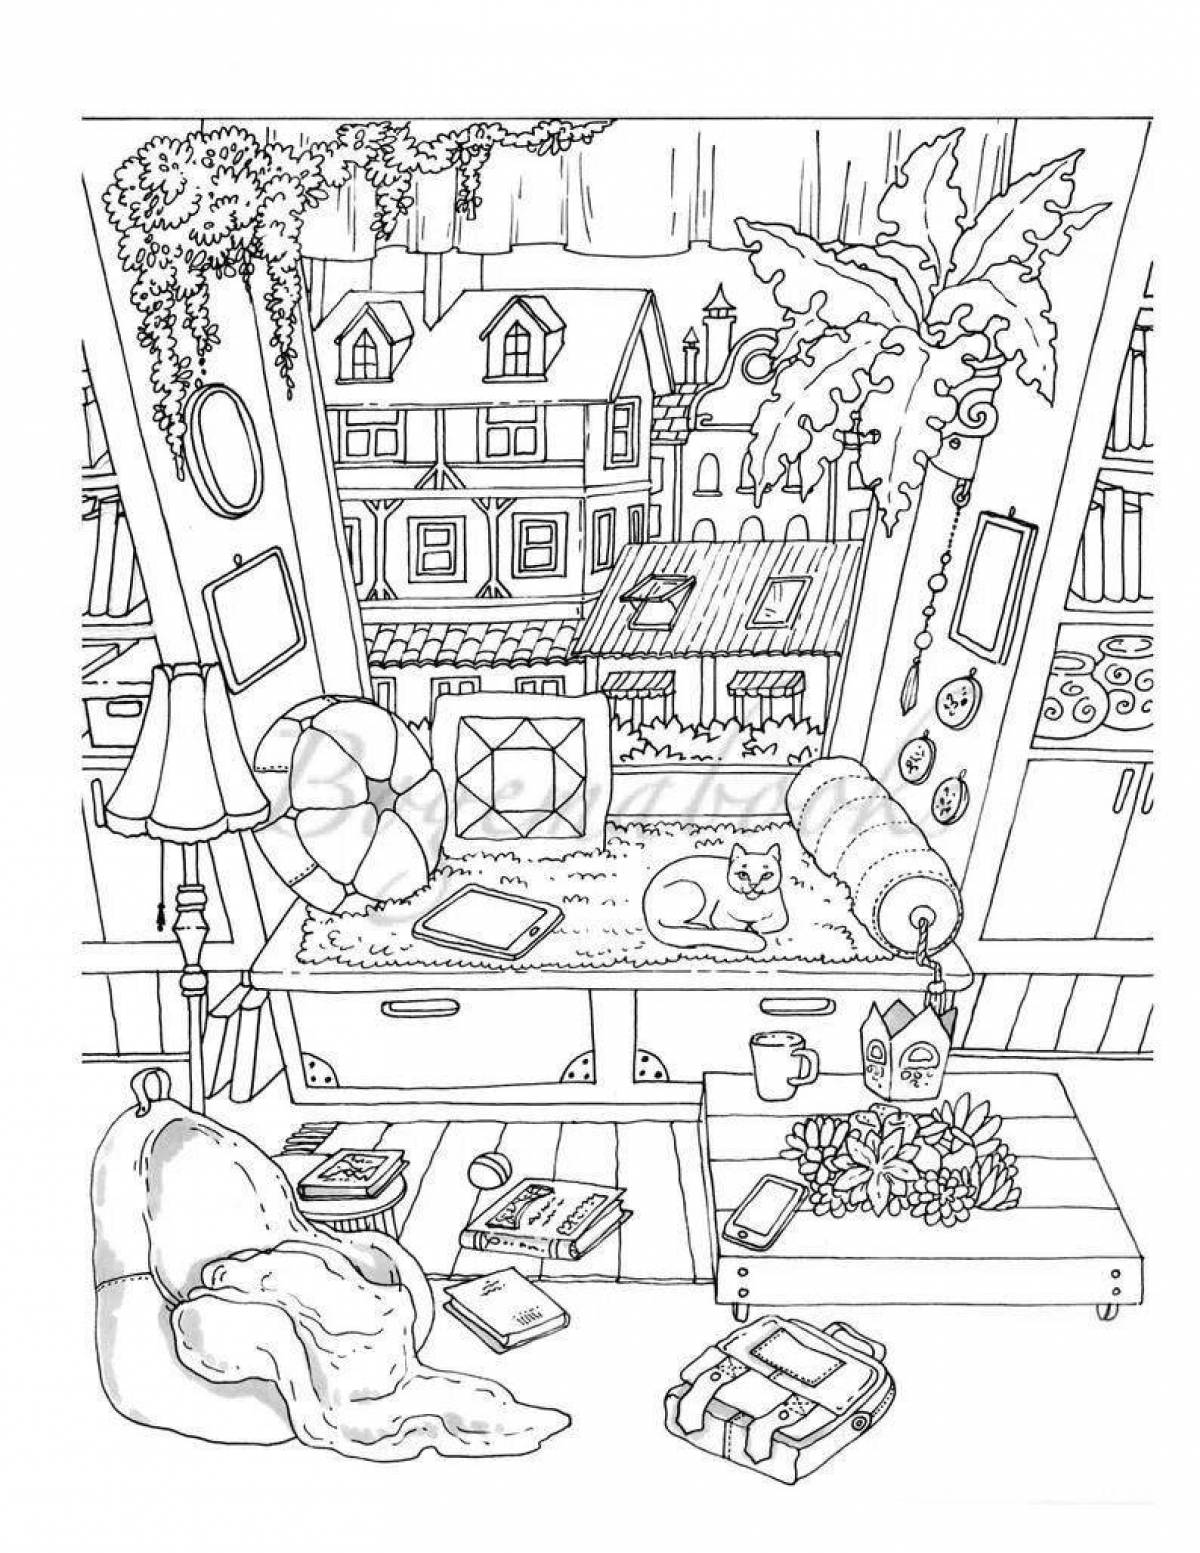 Gorgeous creative chaos coloring page